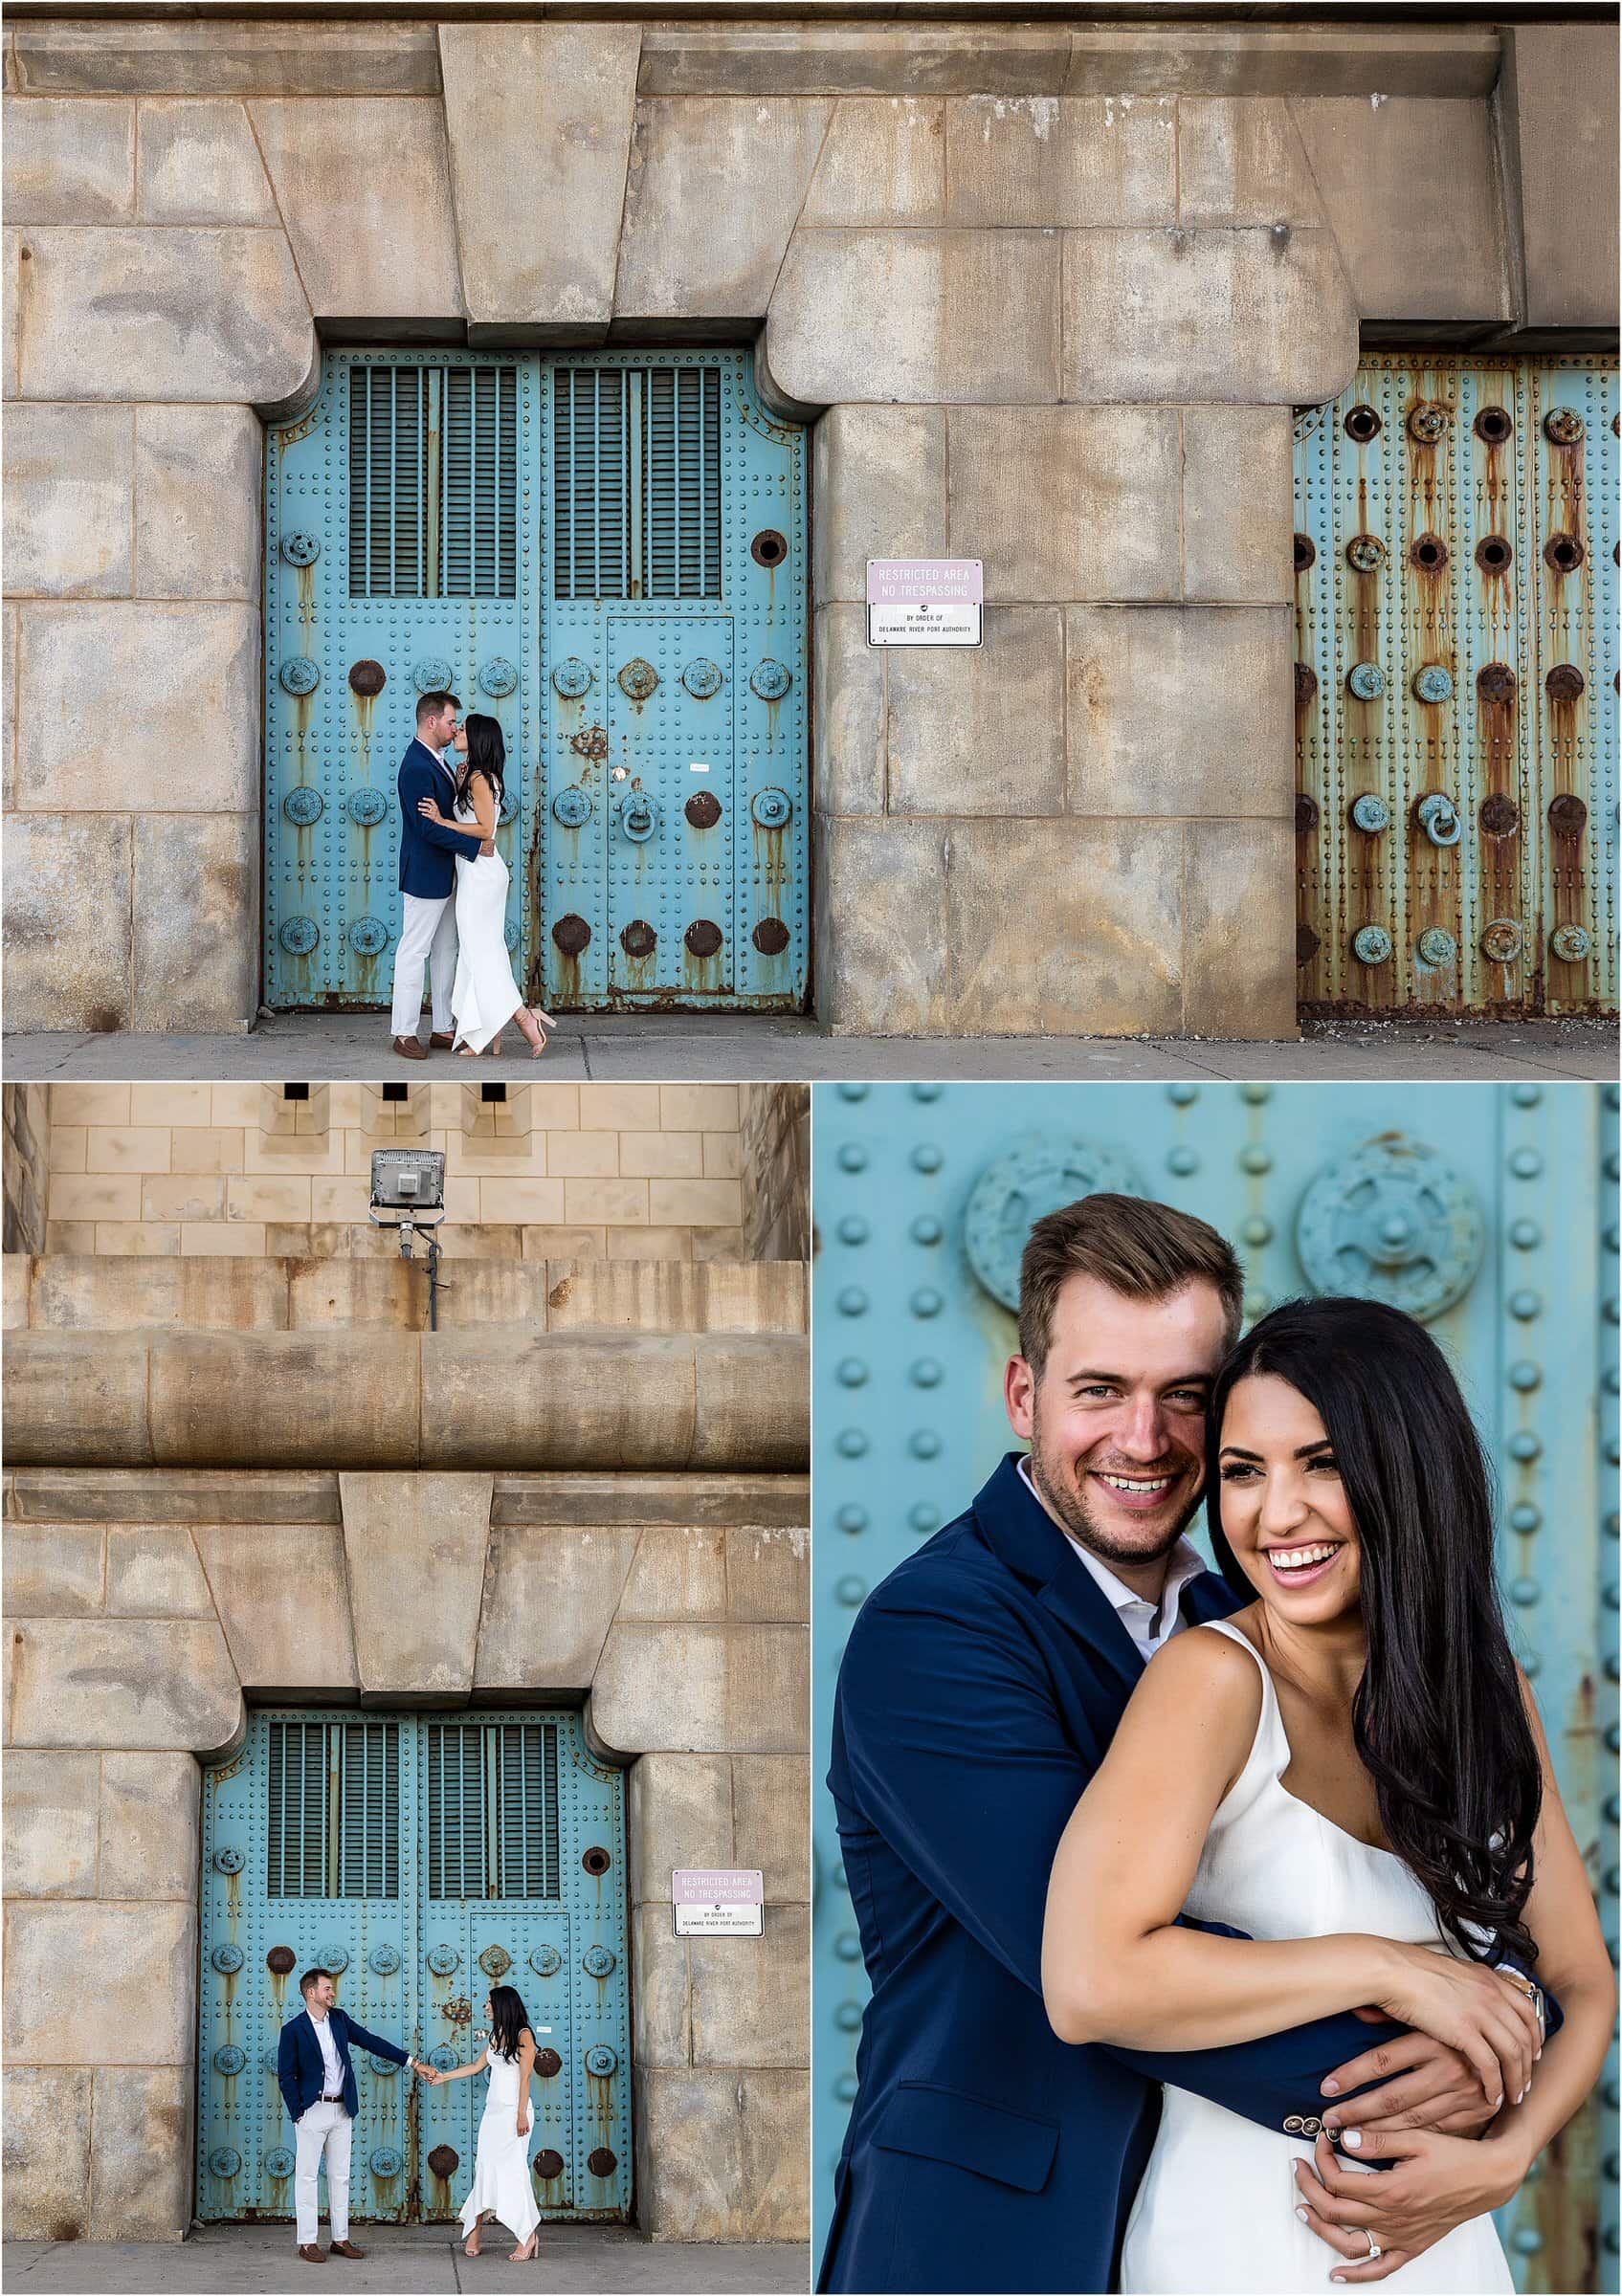 Race St Pier engagement session collage with couple kissing, dancing, and hugging in front of rusting blue gates